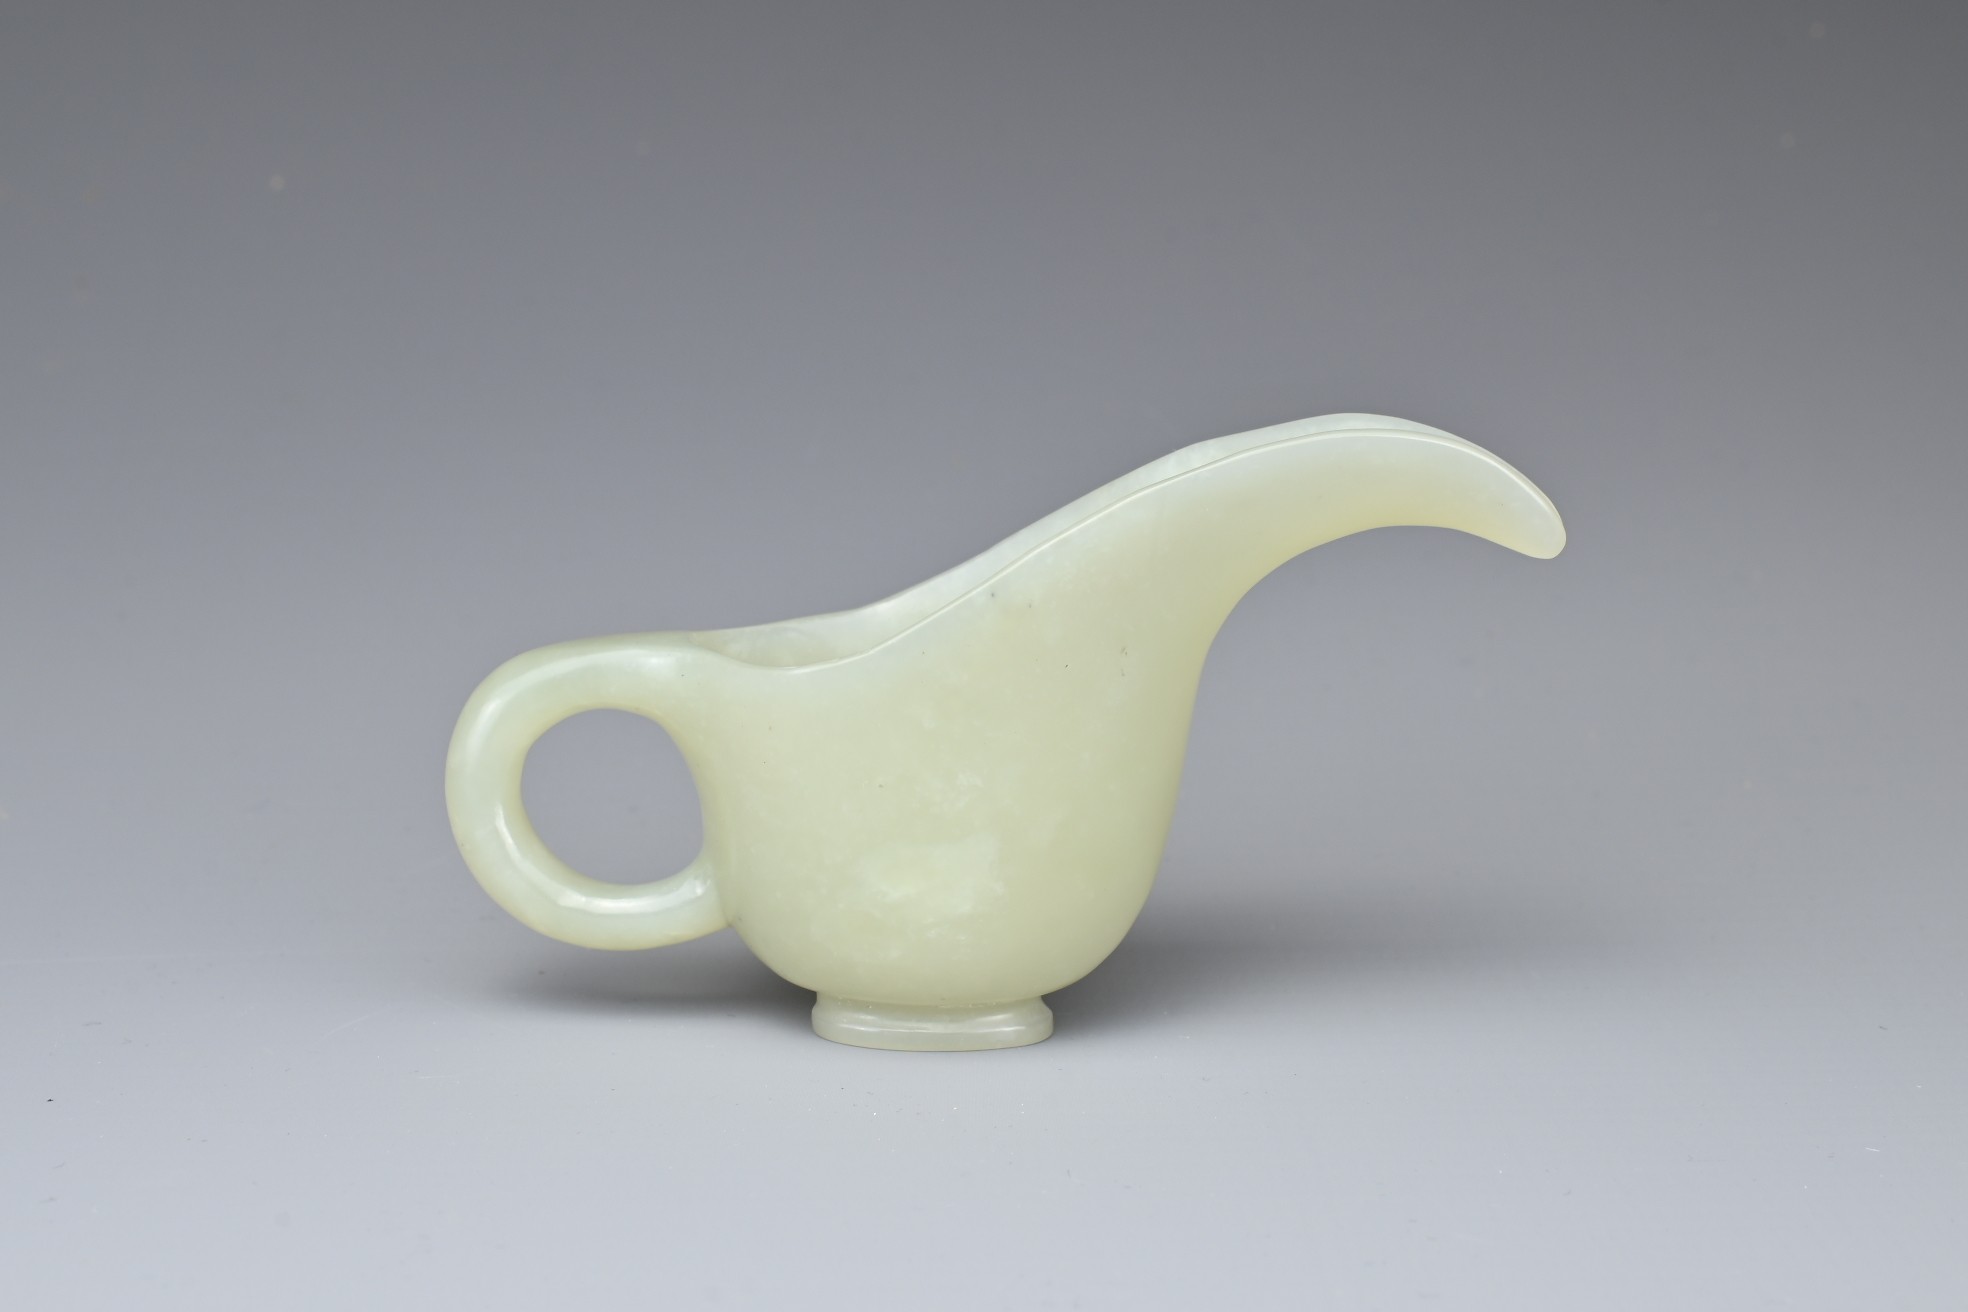 A CHINESE PALE CELADON JADE CUP. Of slender form with a looped handle and curved spout. 10.5cm